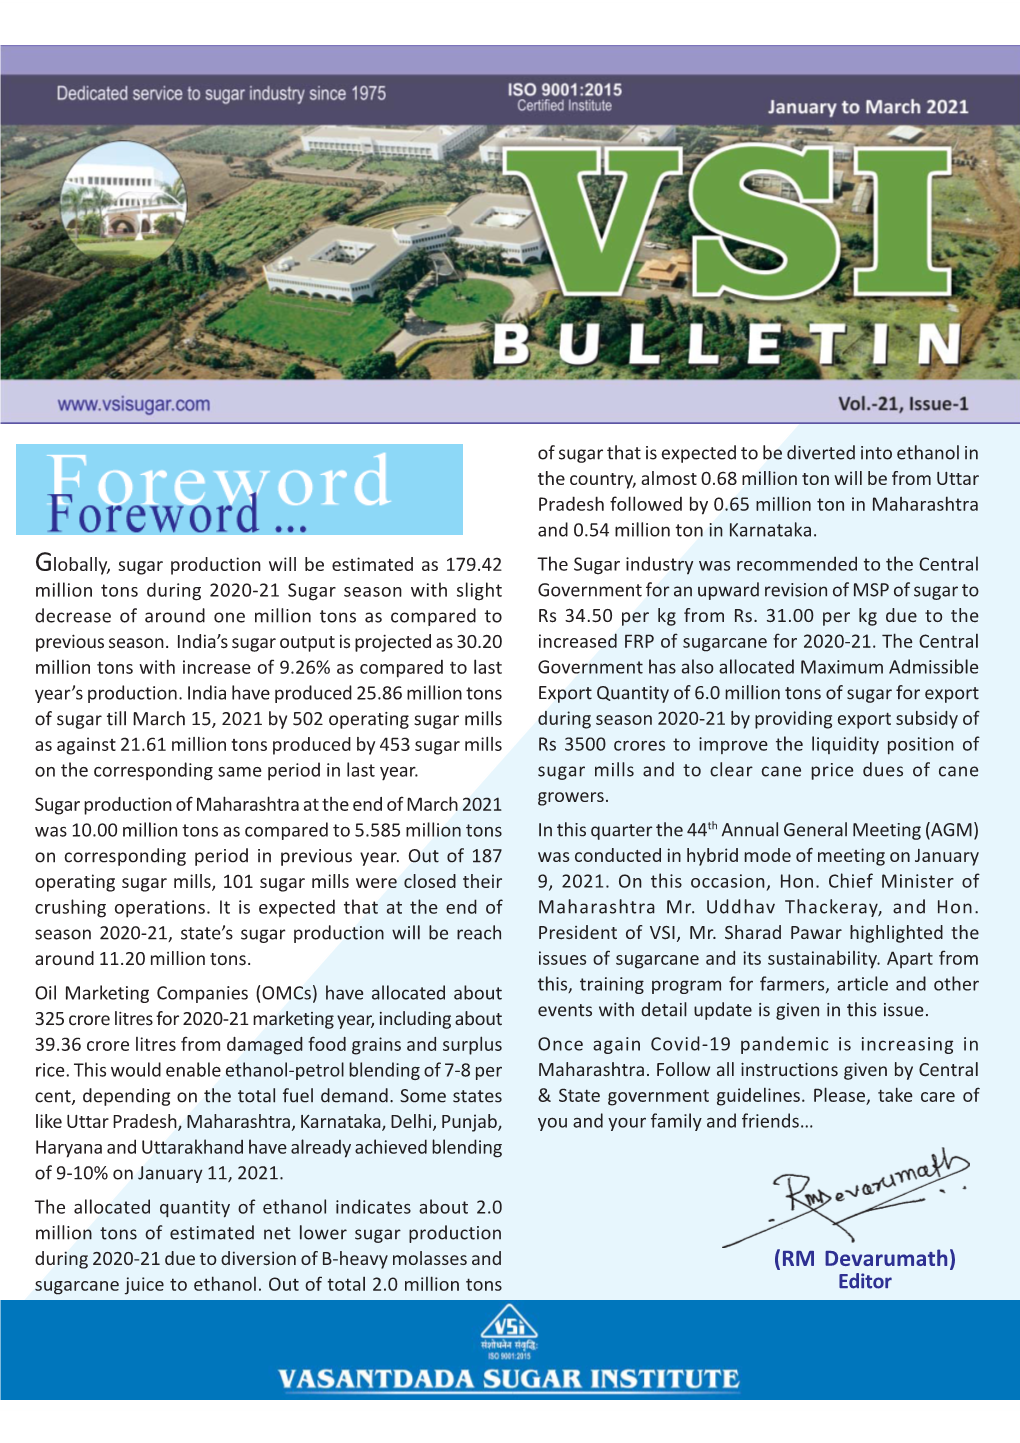 VSI Bulletin 21 Issue-1 January to March 2021